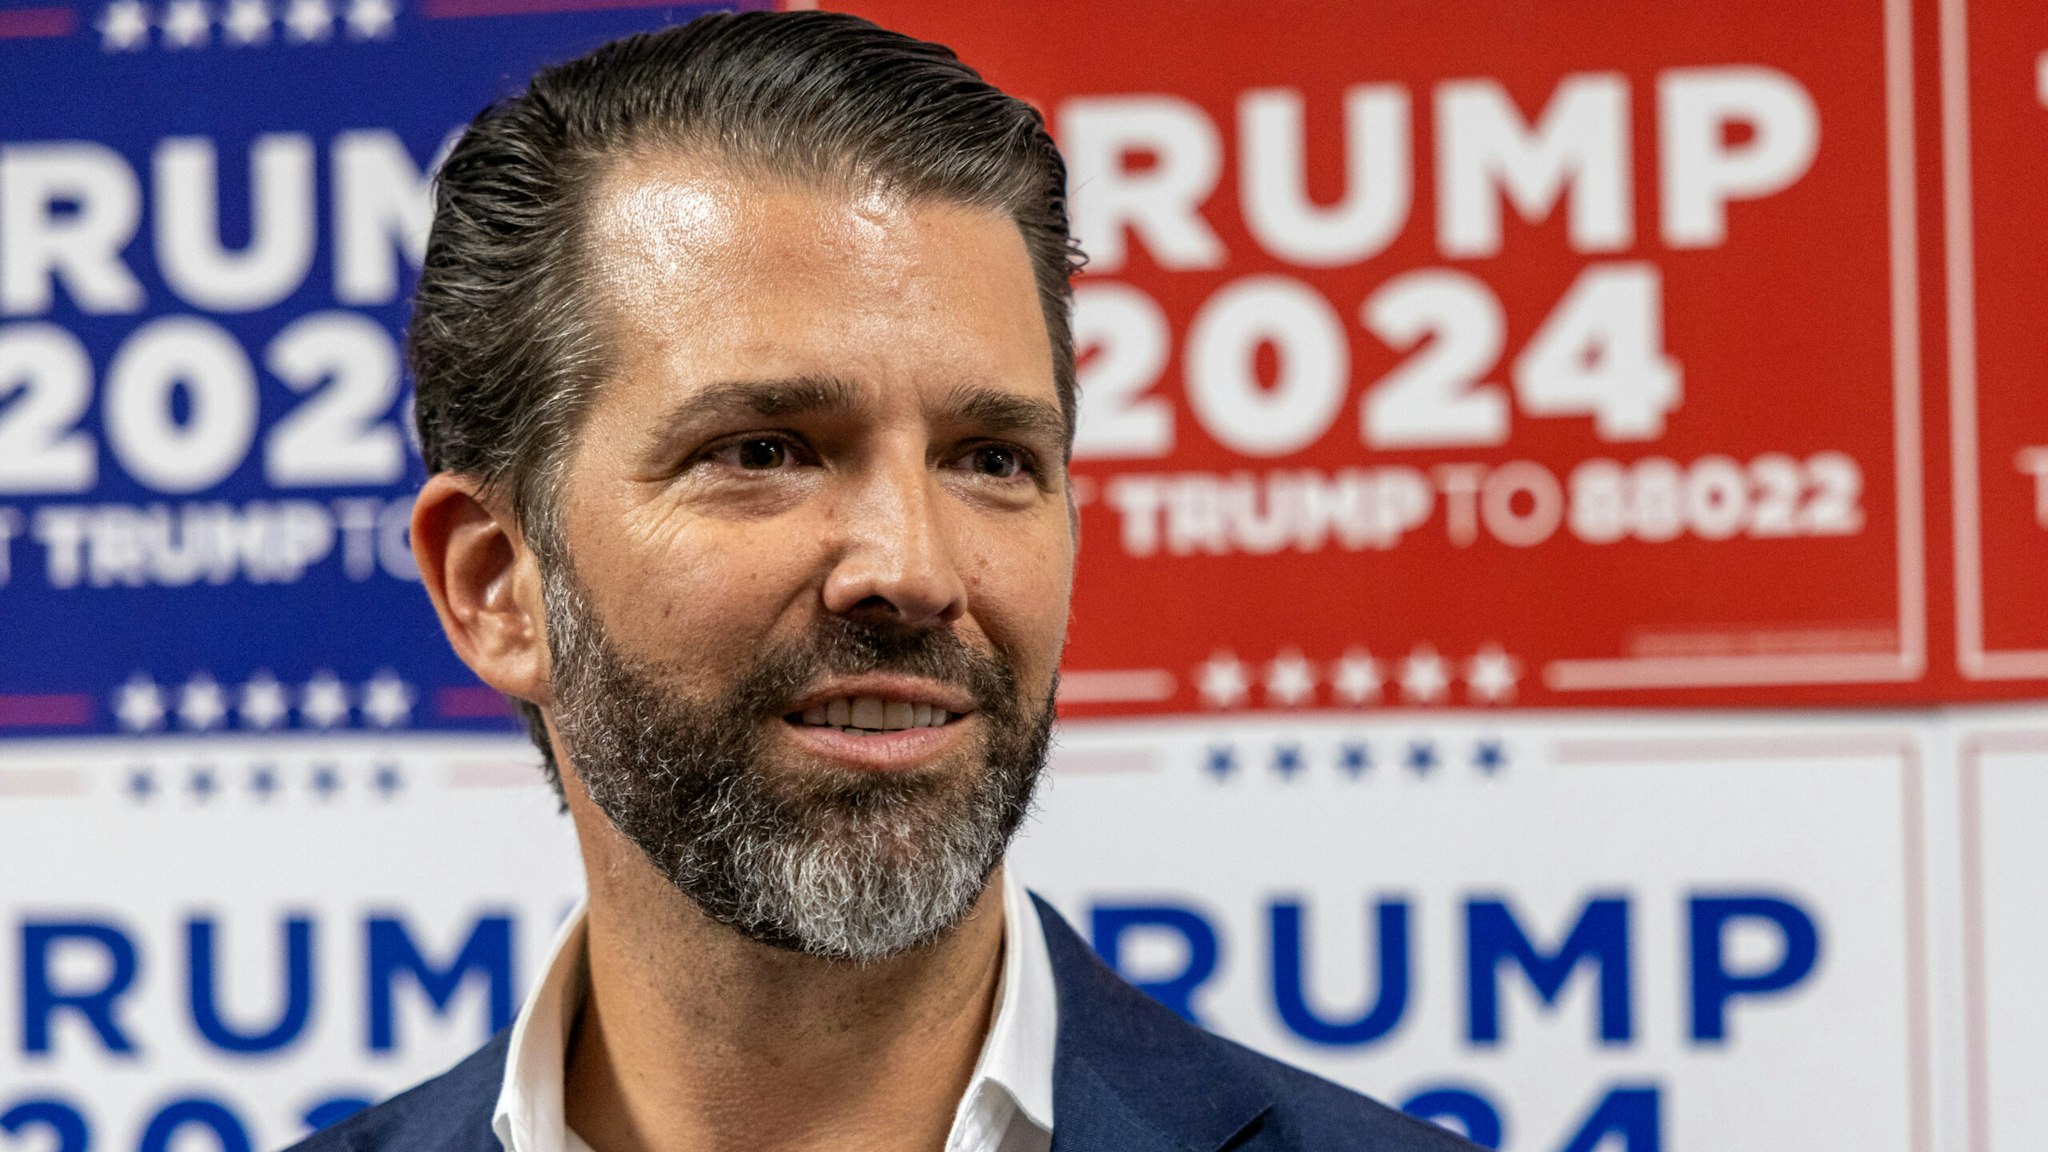 CHARLESTON, SOUTH CAROLINA - FEBRUARY 23: Donald Trump Jr. speaks to media at a rally for his father, Republican Presidential candidate, former U.S. President Donald Trump on February 23, 2024 in Charleston, South Carolina. South Carolina holds its Republican primary on February 24.